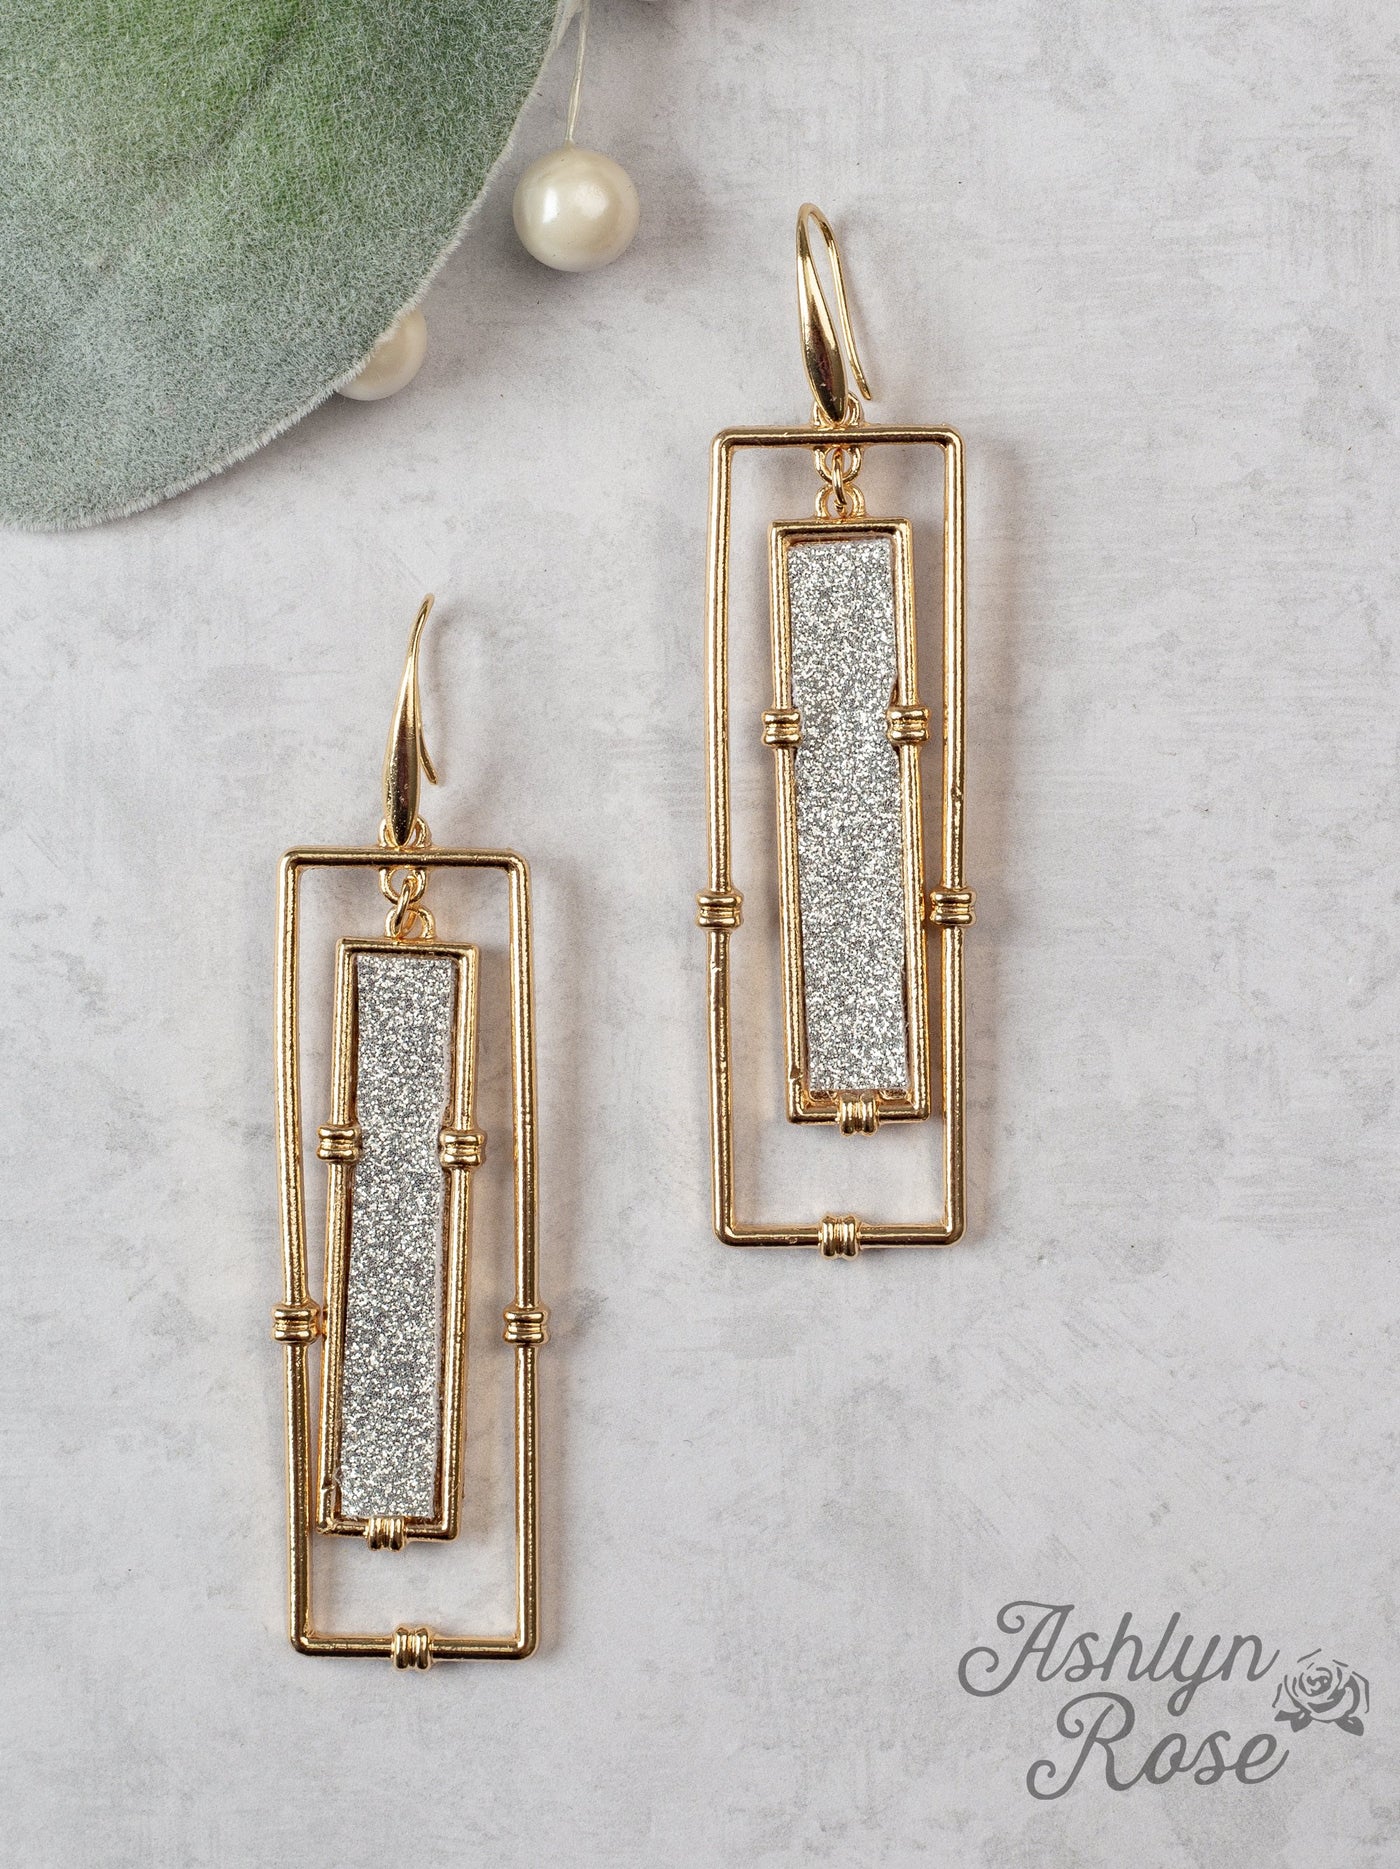 Think Outside Of The Frame Silver And Gold Rectangular Earrings